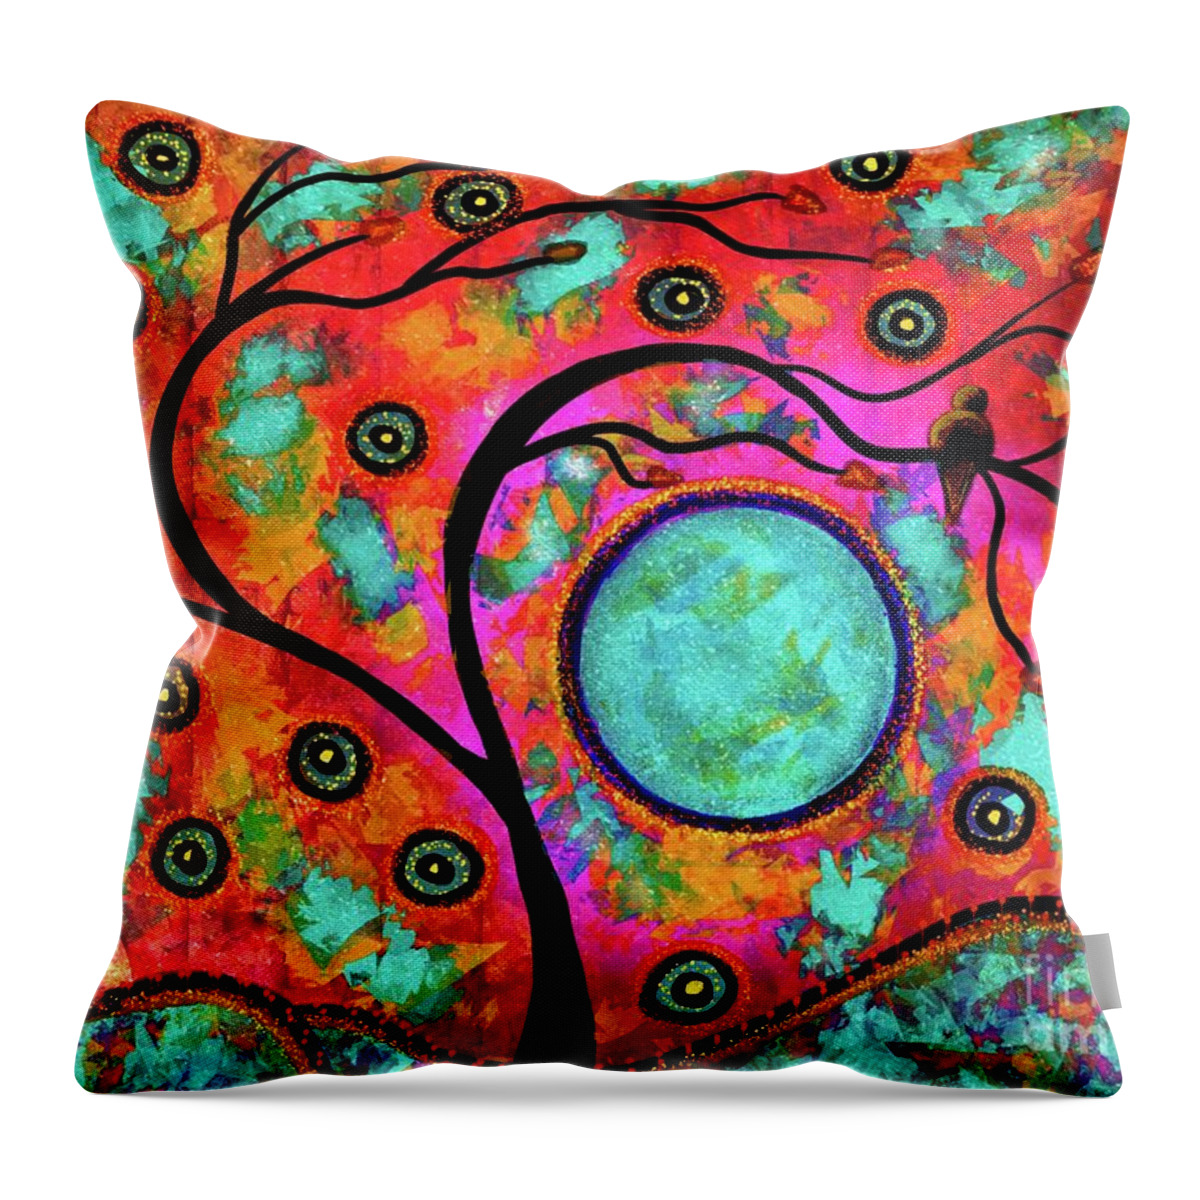 Whimsical Throw Pillow featuring the digital art Whimsical Blue Moon Rising by Laurie's Intuitive